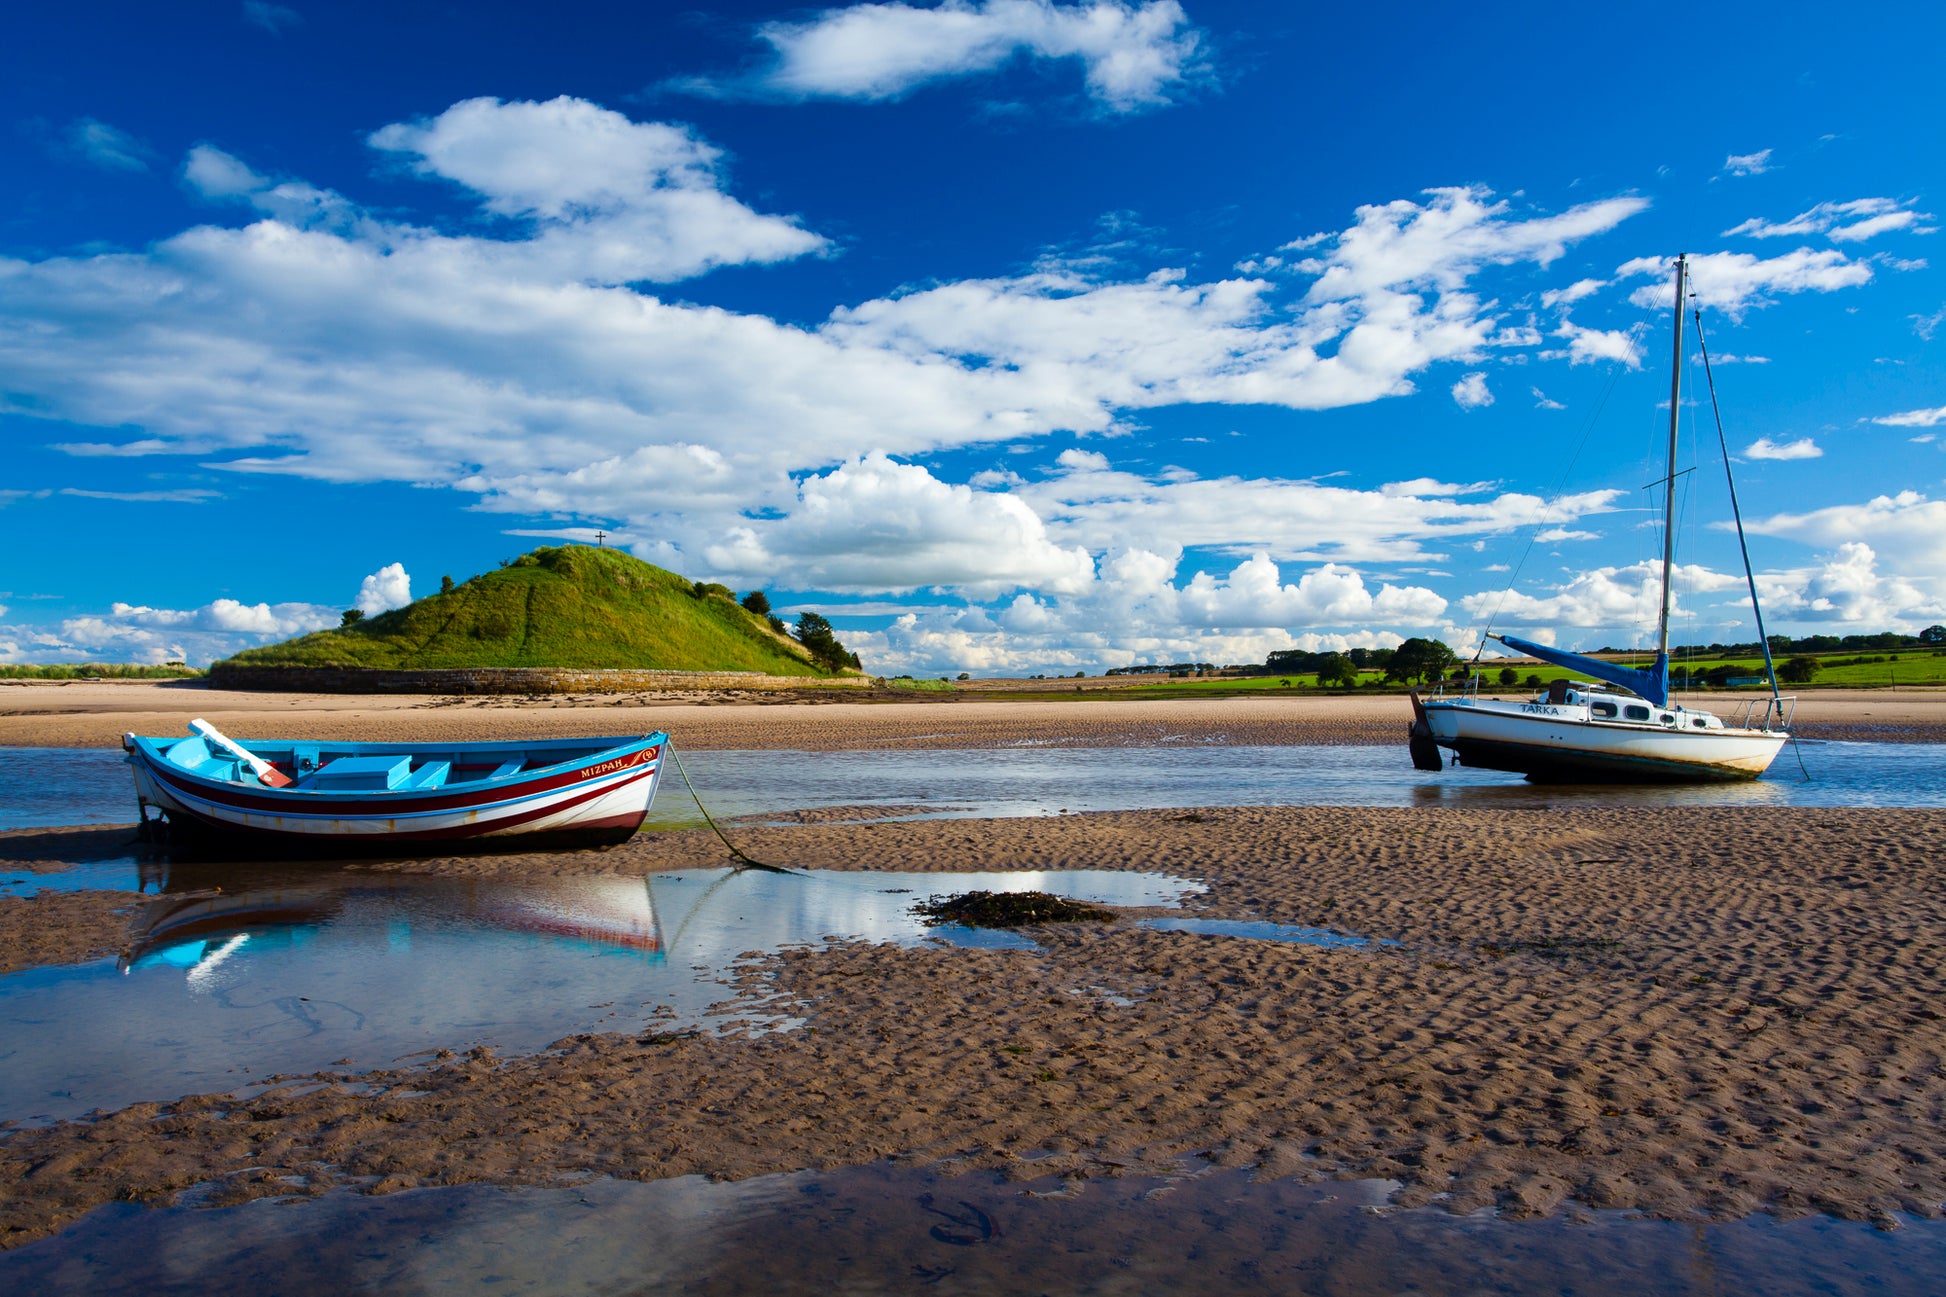 Alnmouth located along the Northumberland Heritage Coast.